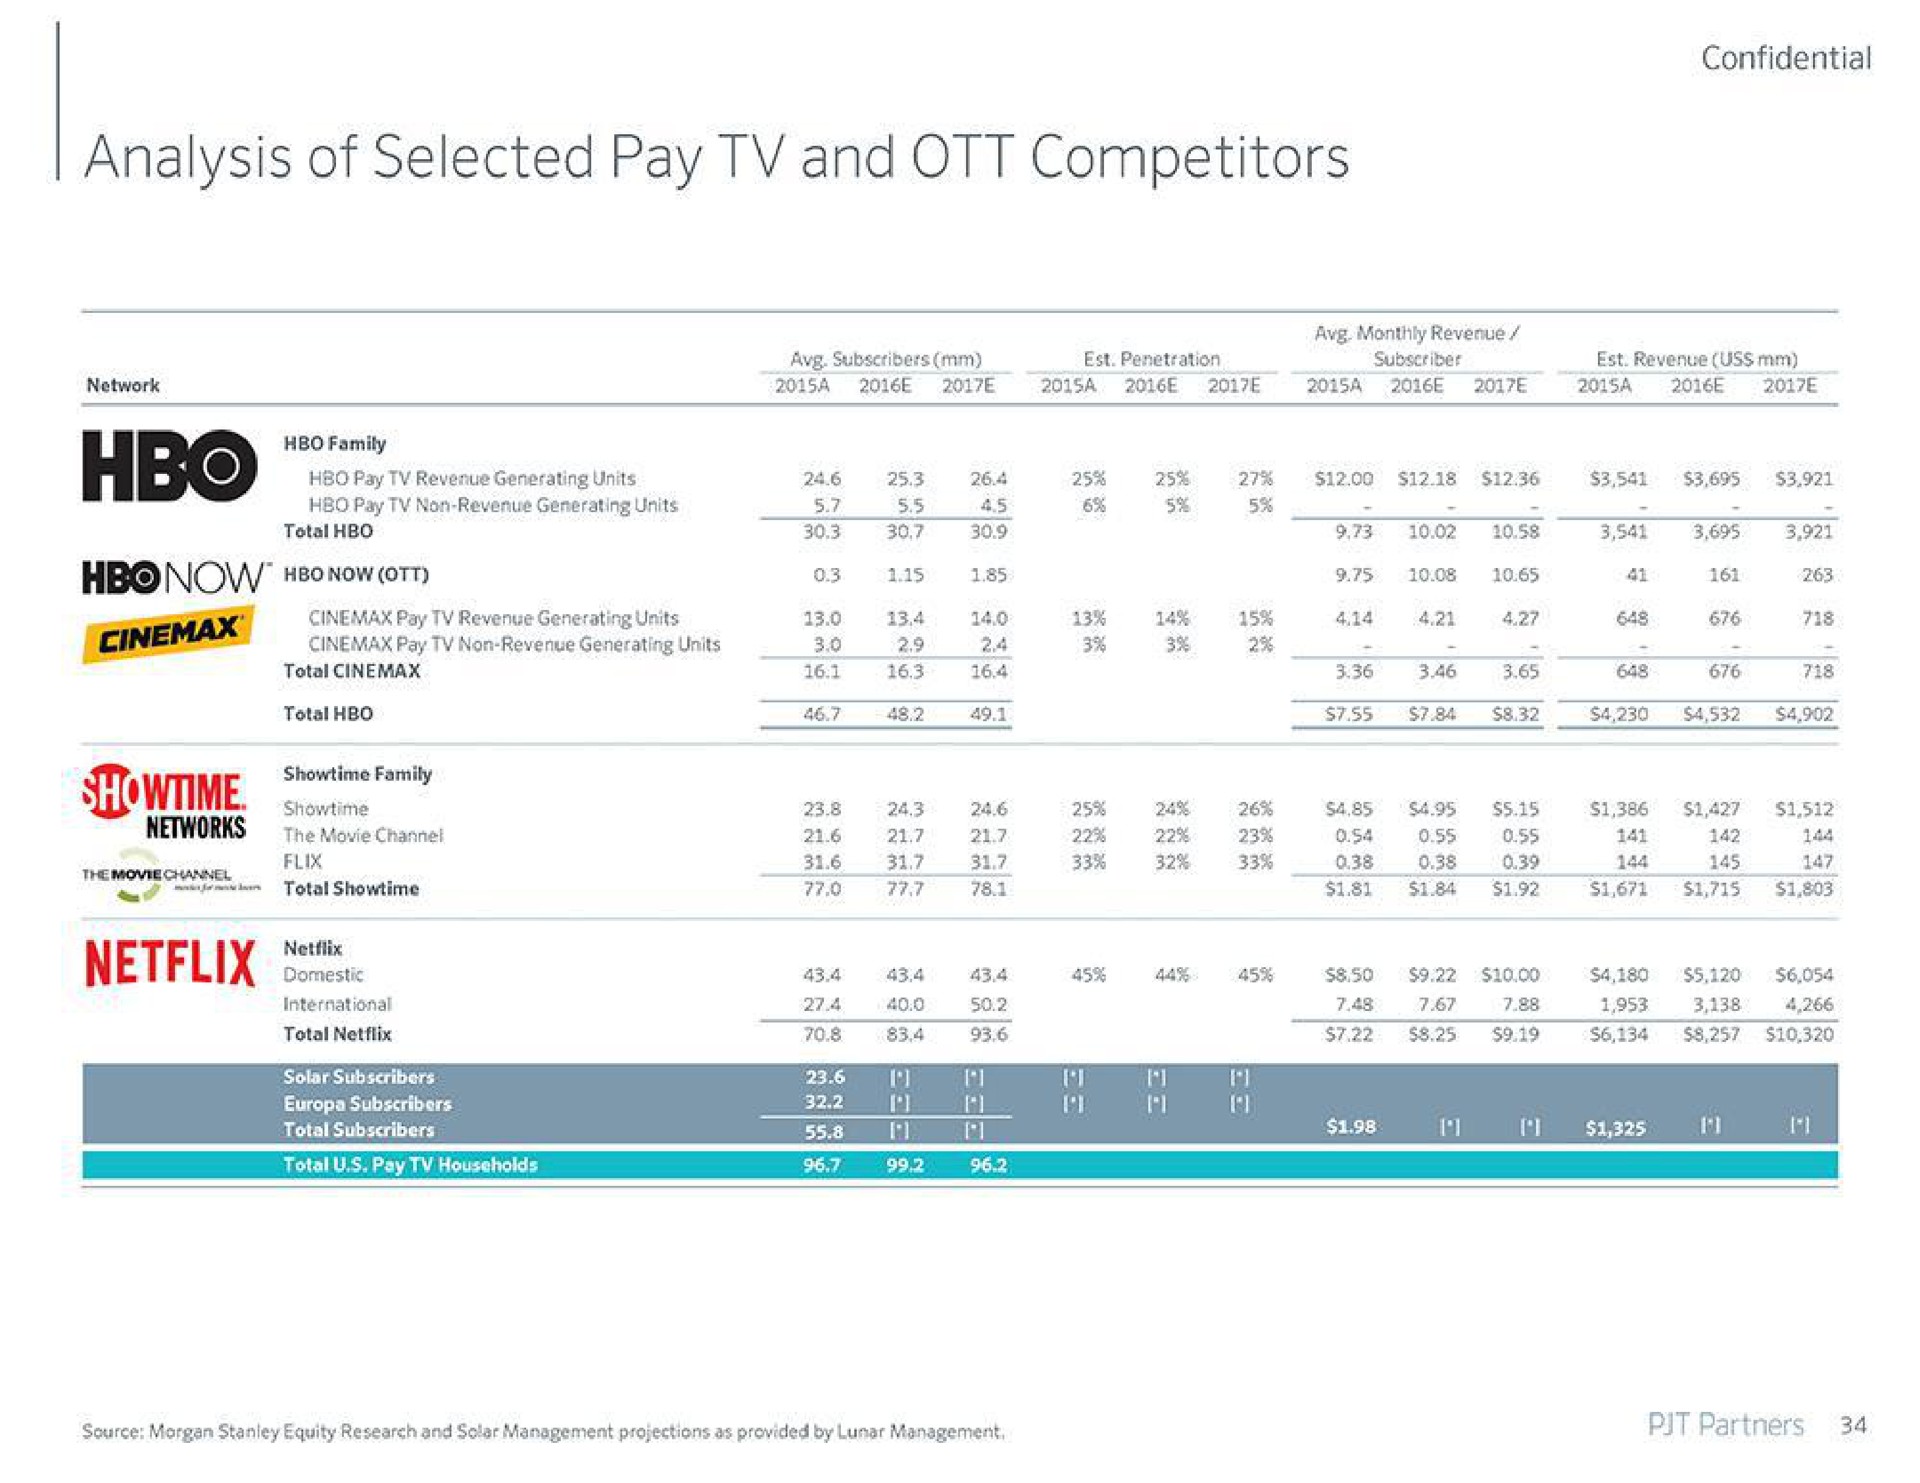 analysis of selected pay and competitors come | PJT Partners